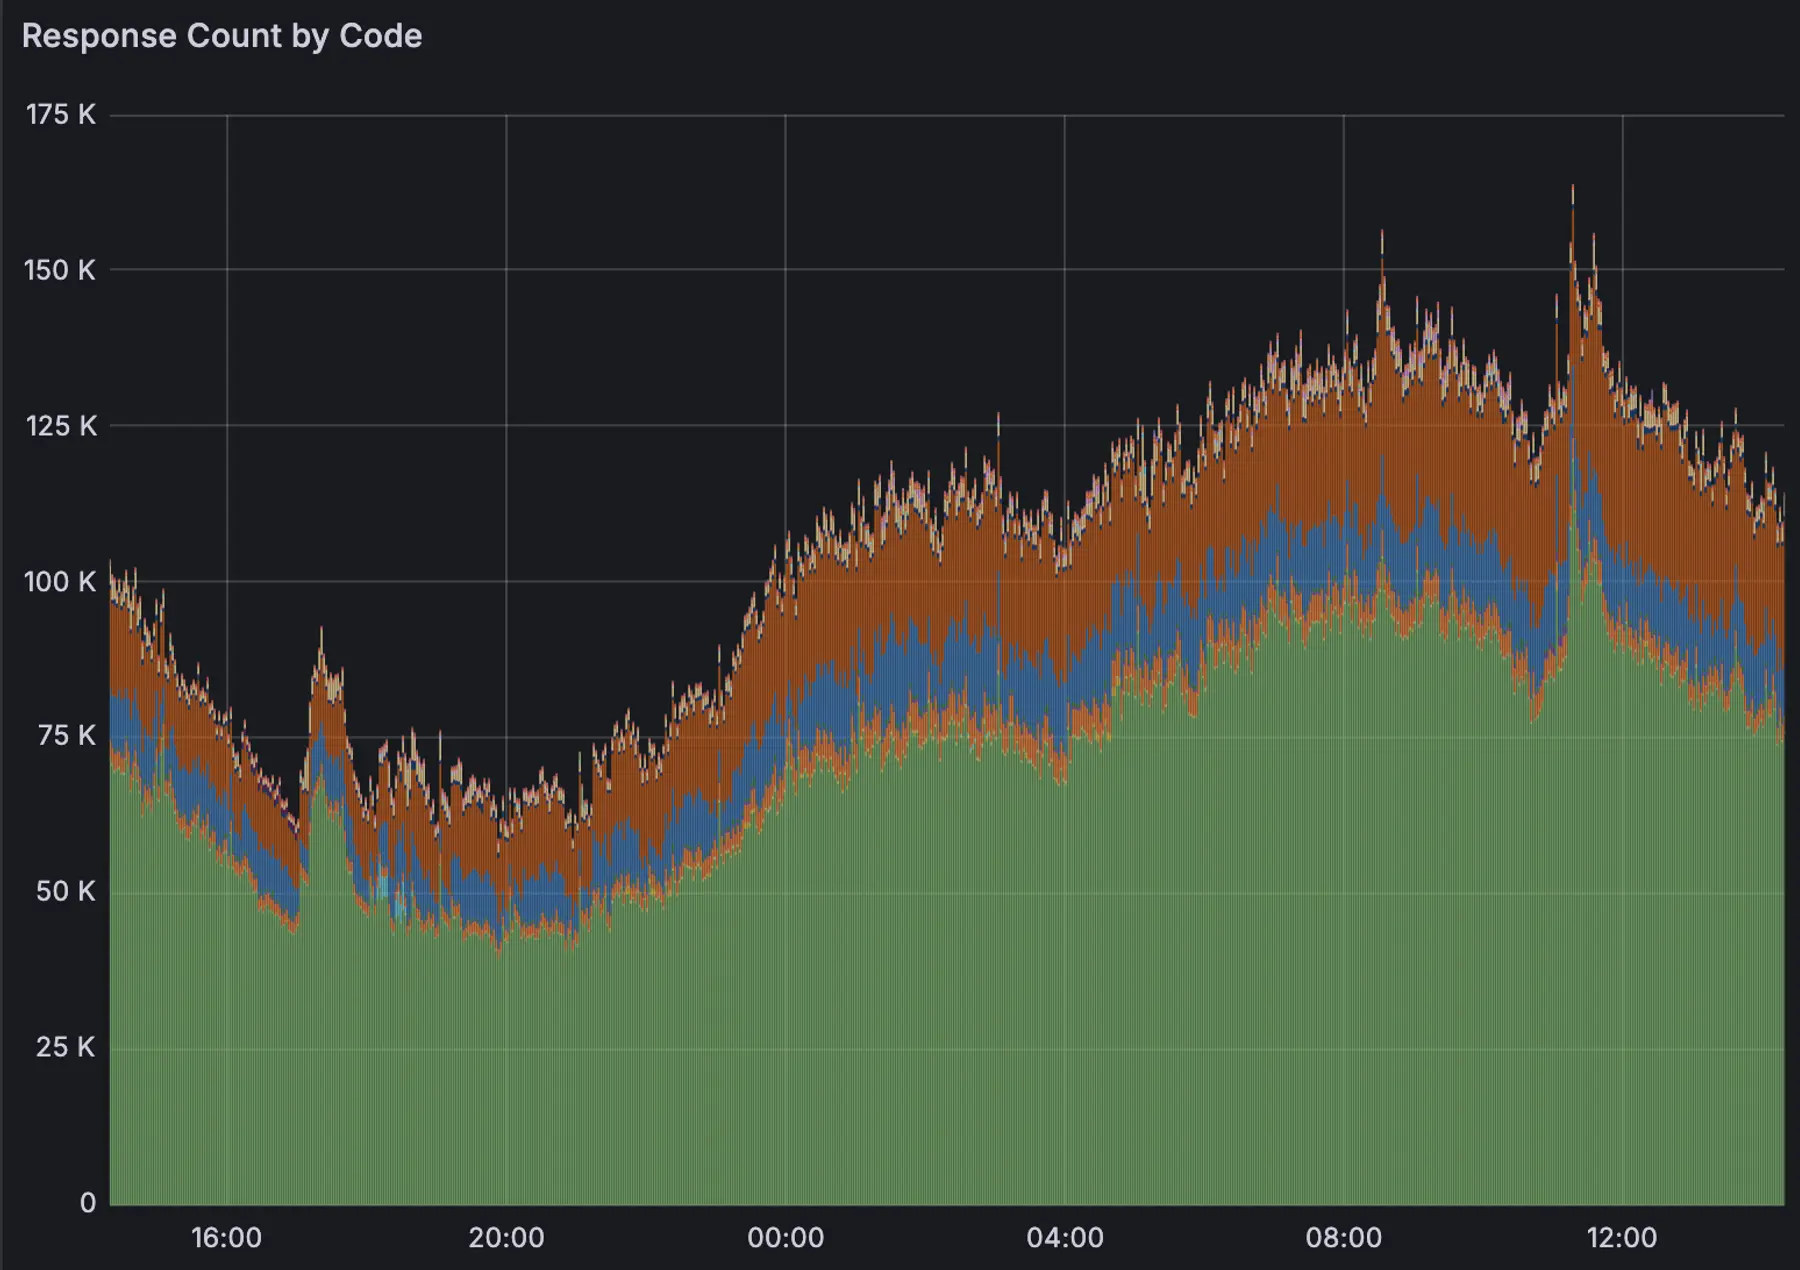 24 hours of recent HTTP traffic to a single Render K8s cluster, in 2-minute intervals